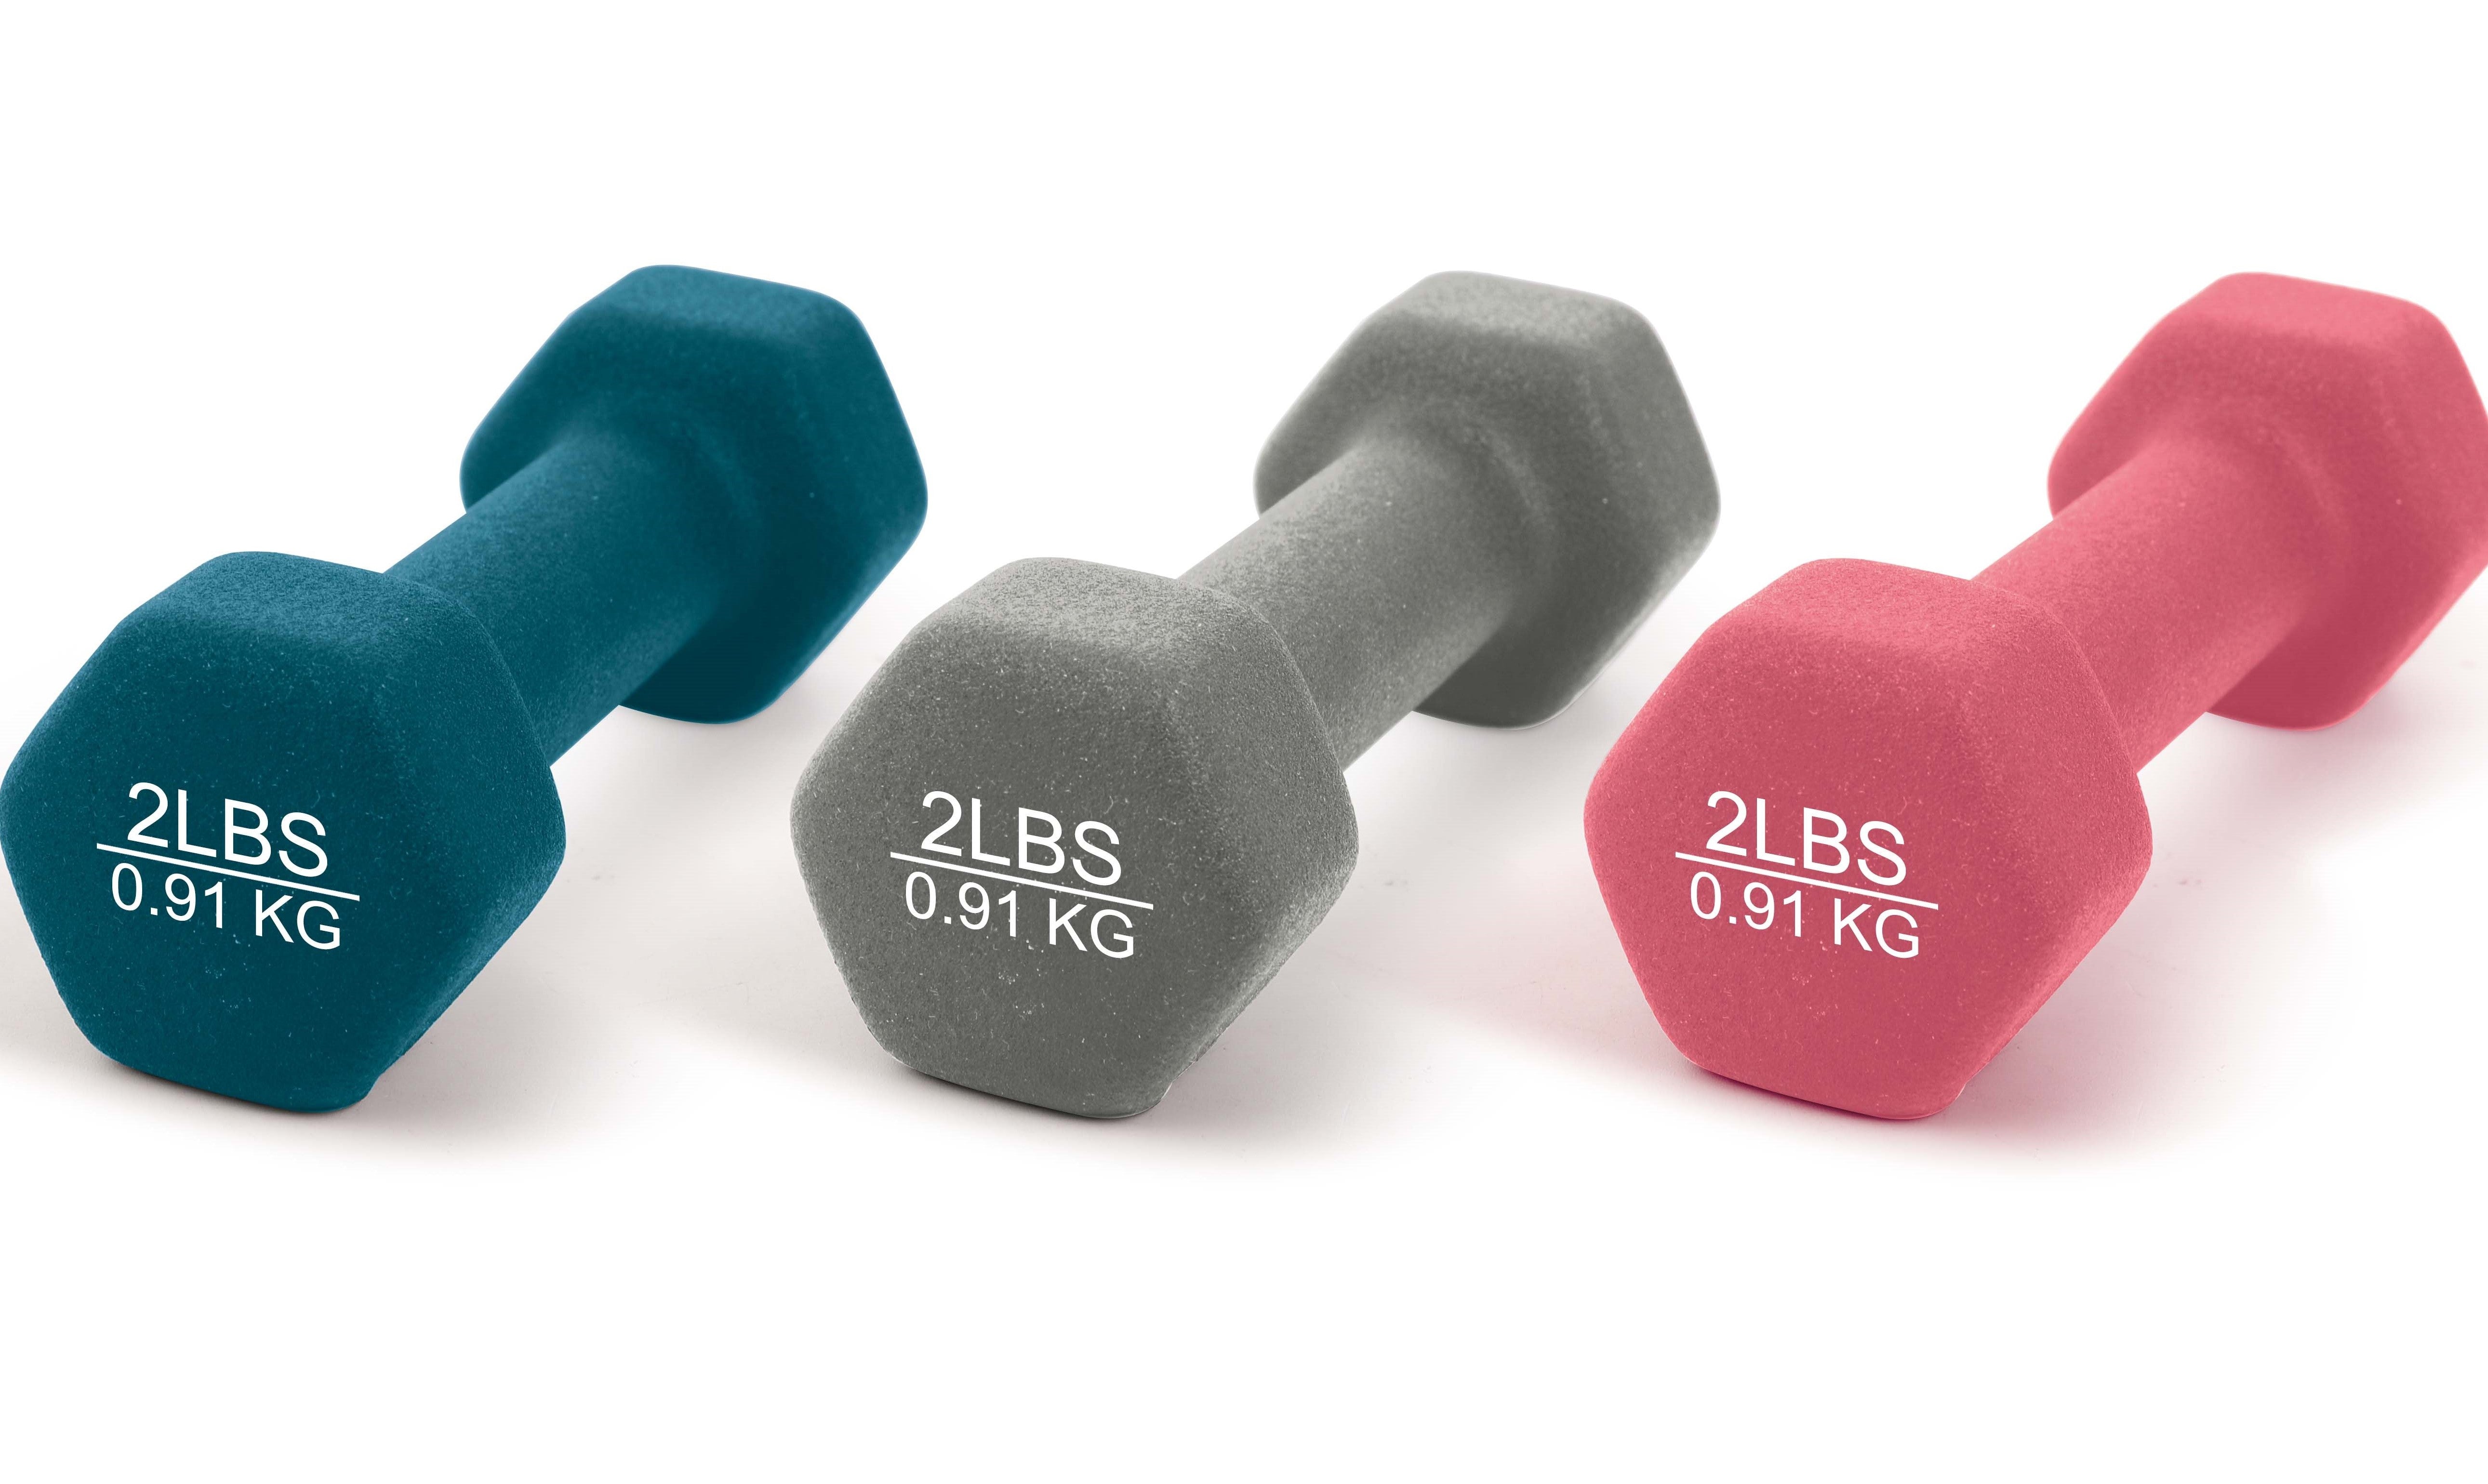 MINISO MINISO SPORTS - WEIGHT SERIES PVC COATING DUMBBELL 2LBS 2013716610102 YOGA ACCESSORIES